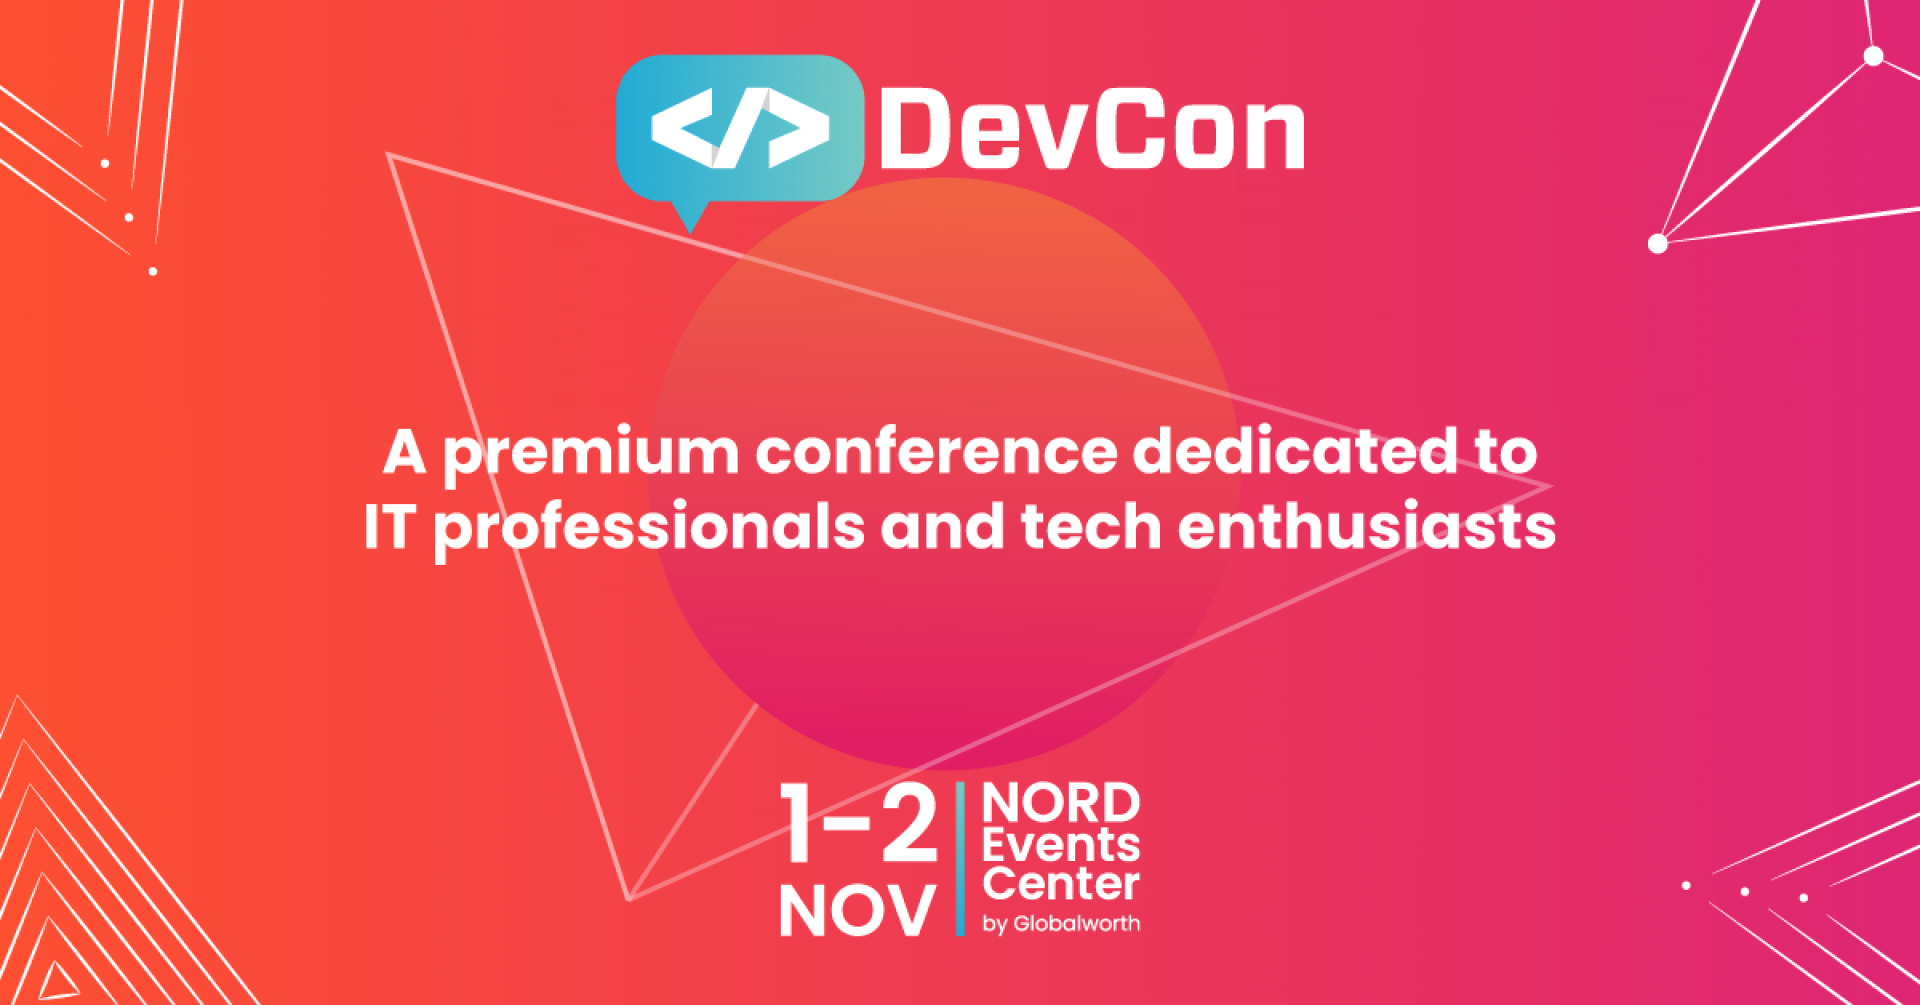 DevCon 2023 returns on 1-2 November, at NORD Events Center by Globalworth | Bucharest, RO